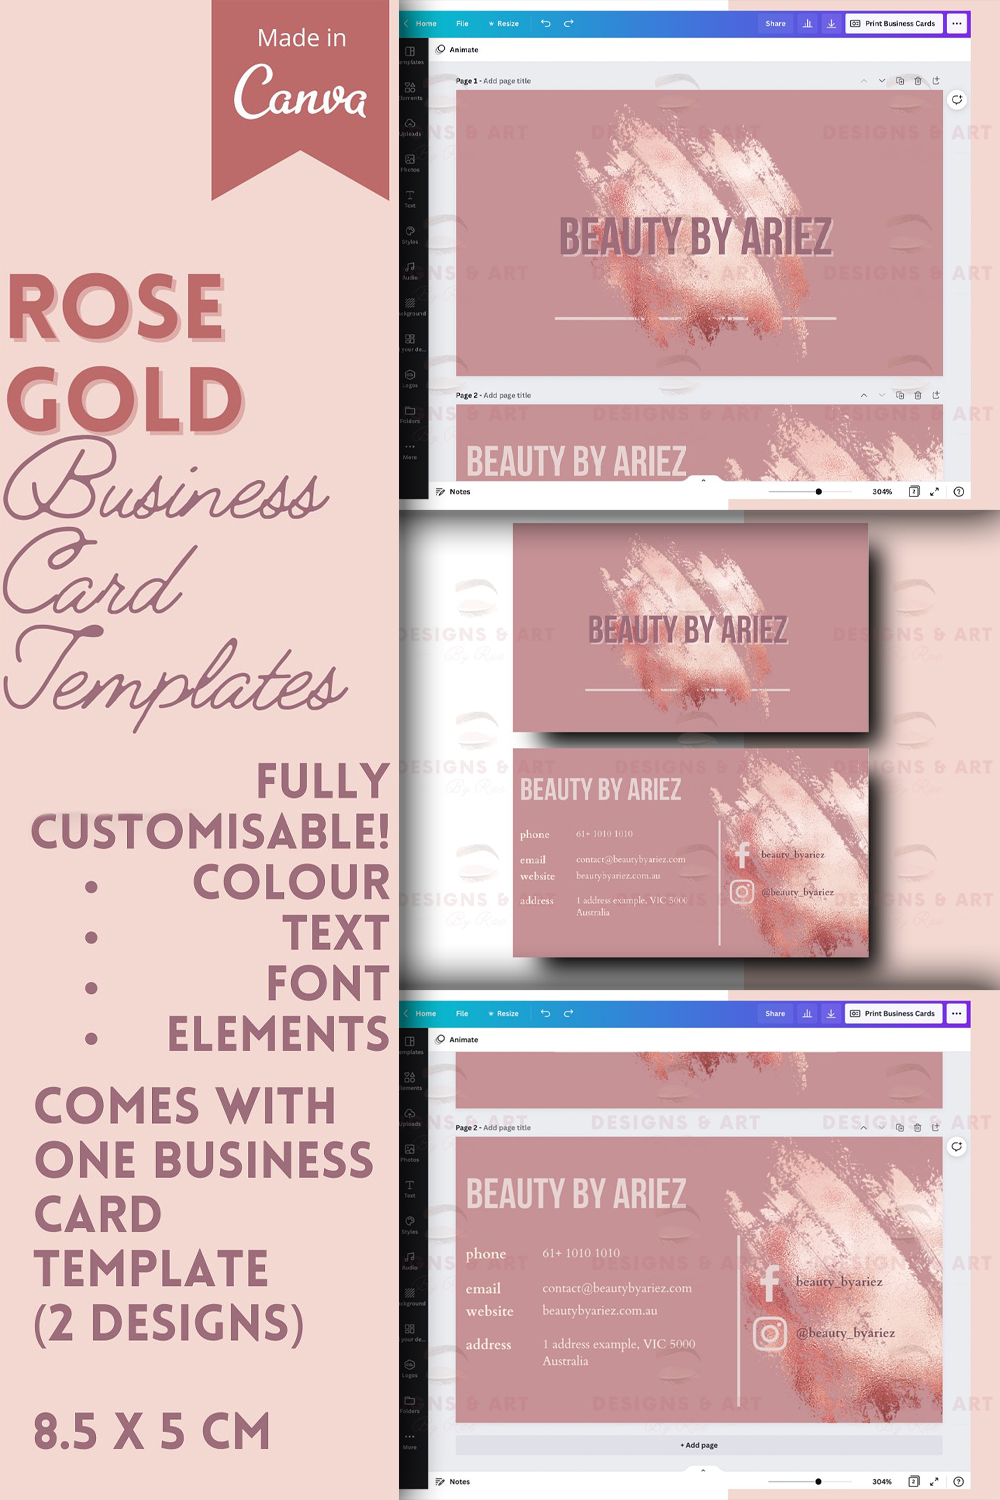 Rose gold business card templates of pinterest.